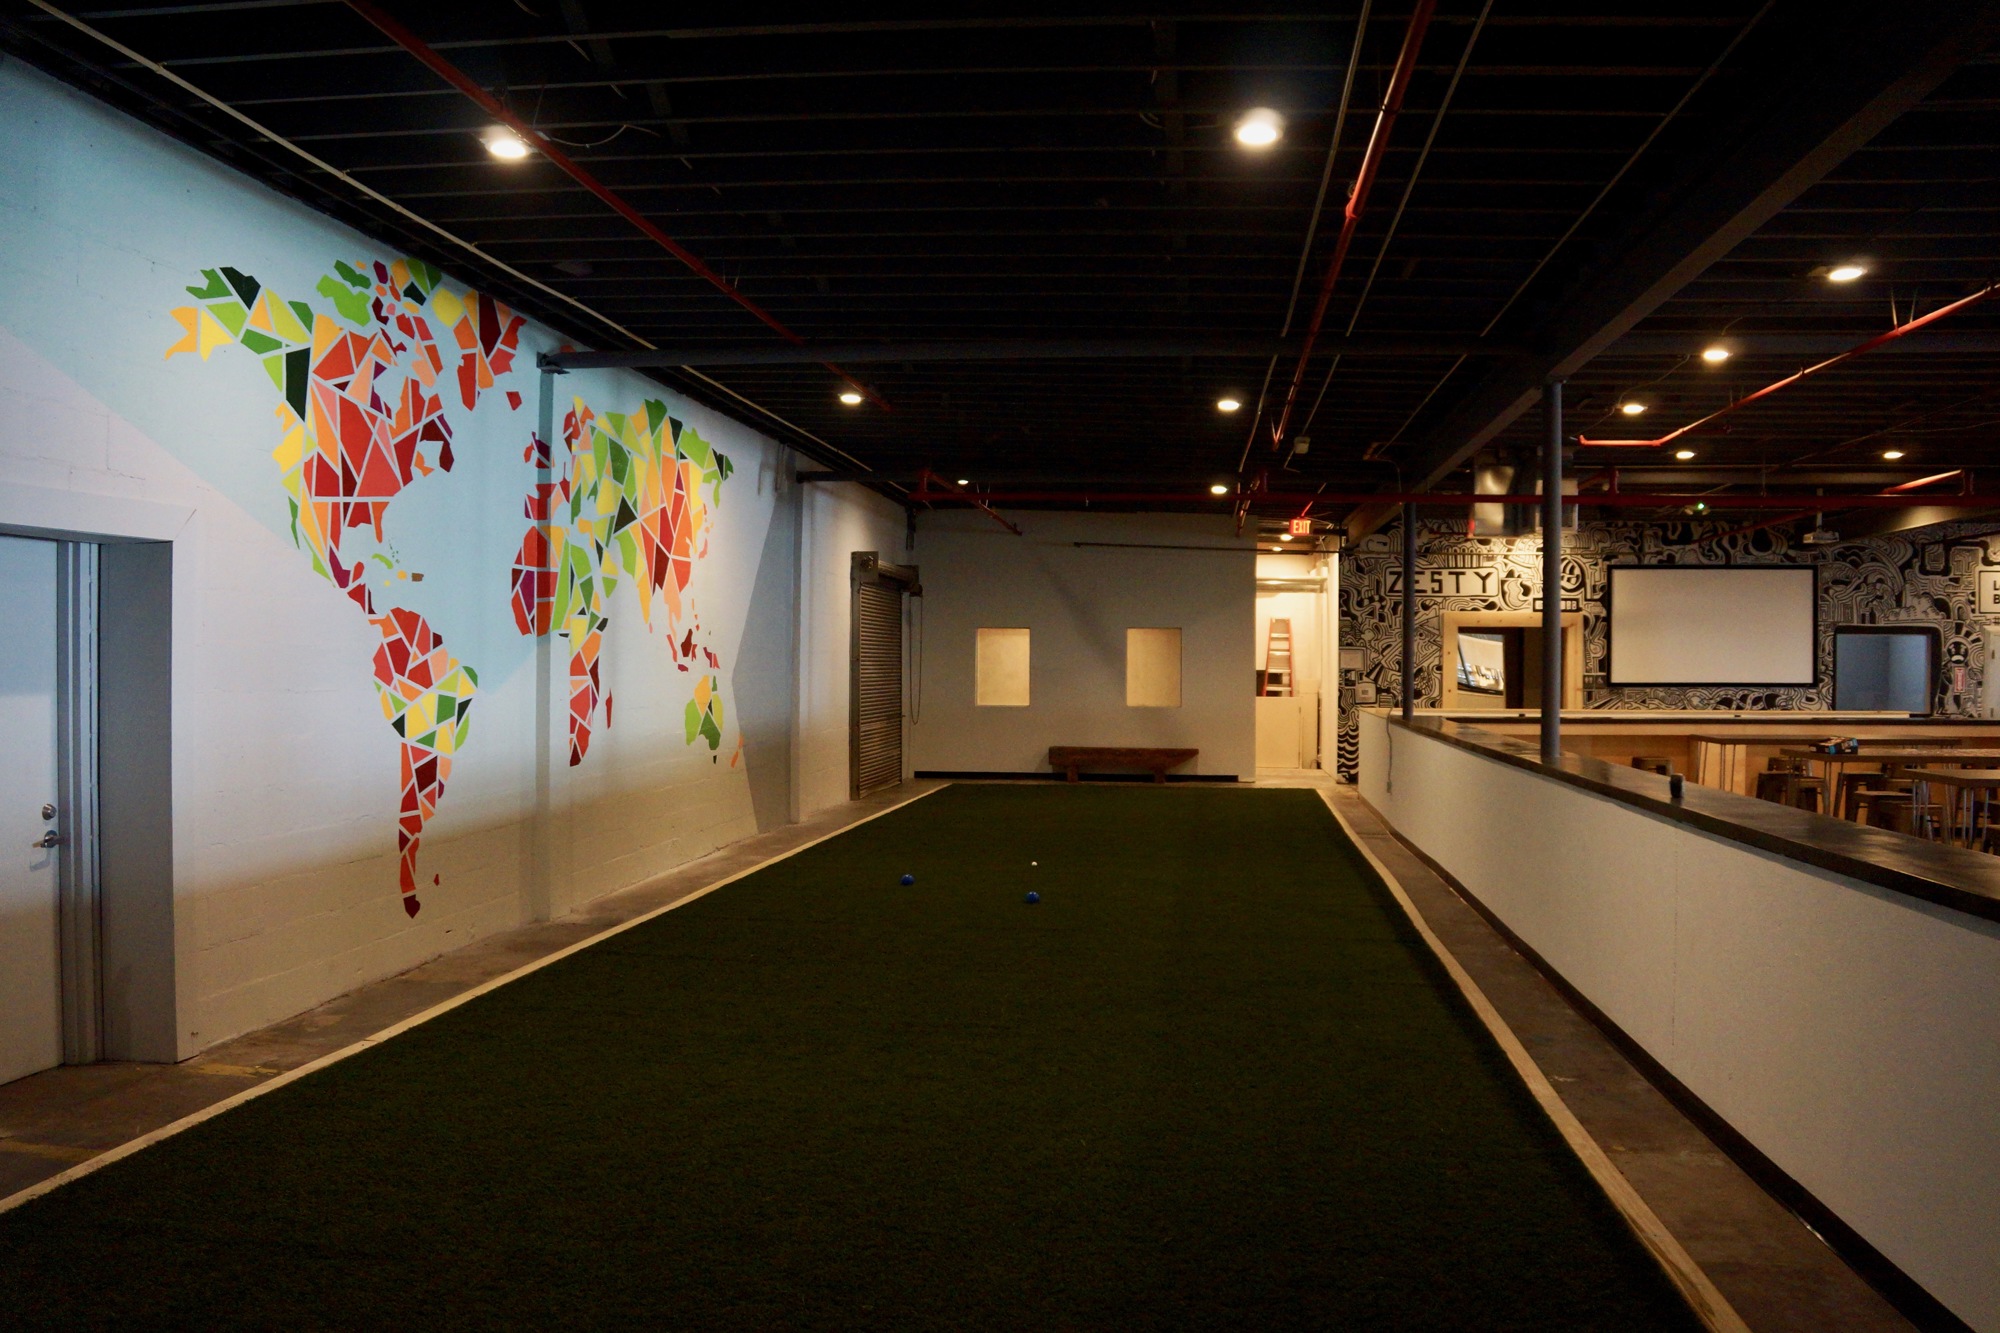 The brewery includes space for two bocce ball courts, where Baez eventually hopes to start a league.